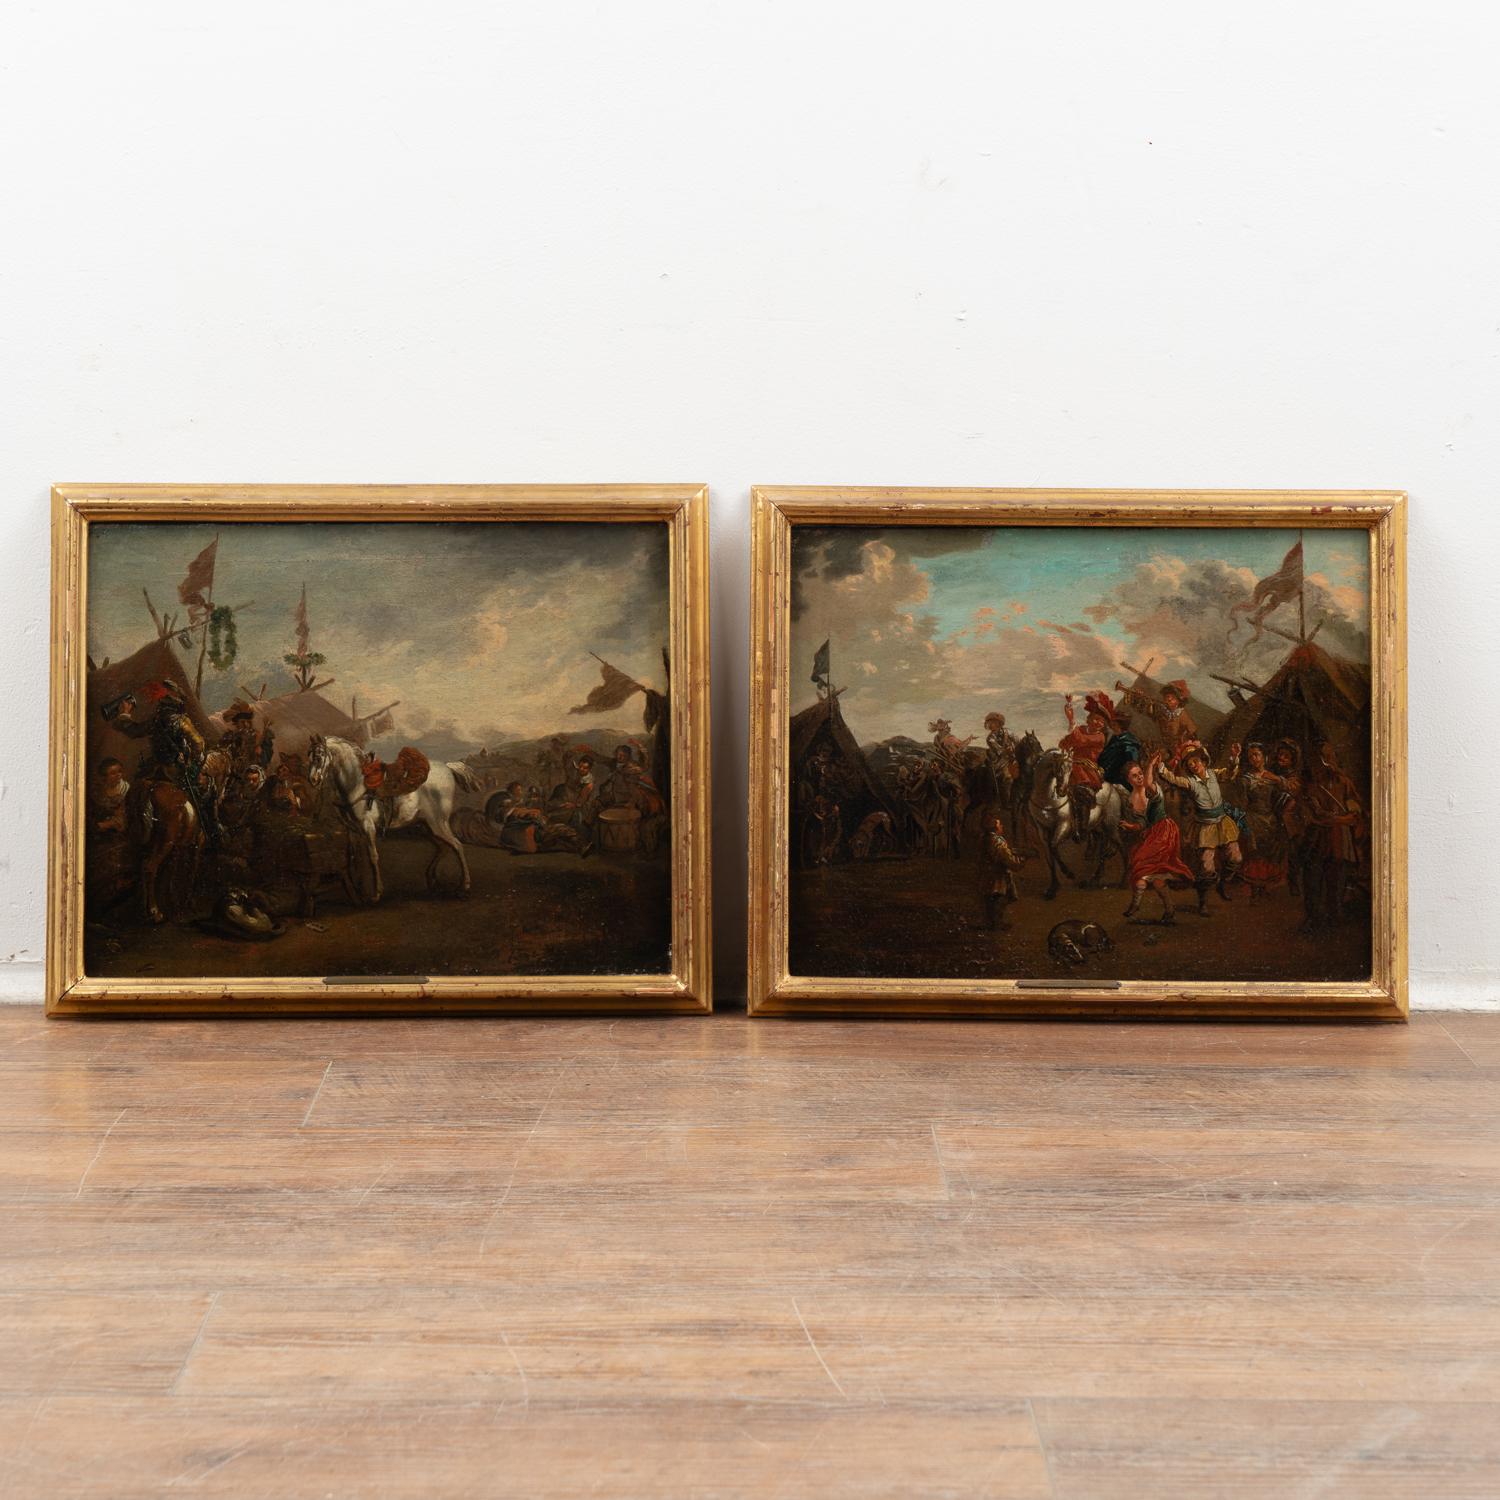 Pair, Original oil on canvas paintings with calvary soldiers near encampment. Unsigned, brass plaque on each reads August Querfurt 1696-1761.
August Querfurt (1696–1761) was an Austrian painter born in Vienna.
Condition: Crackles, peelings and